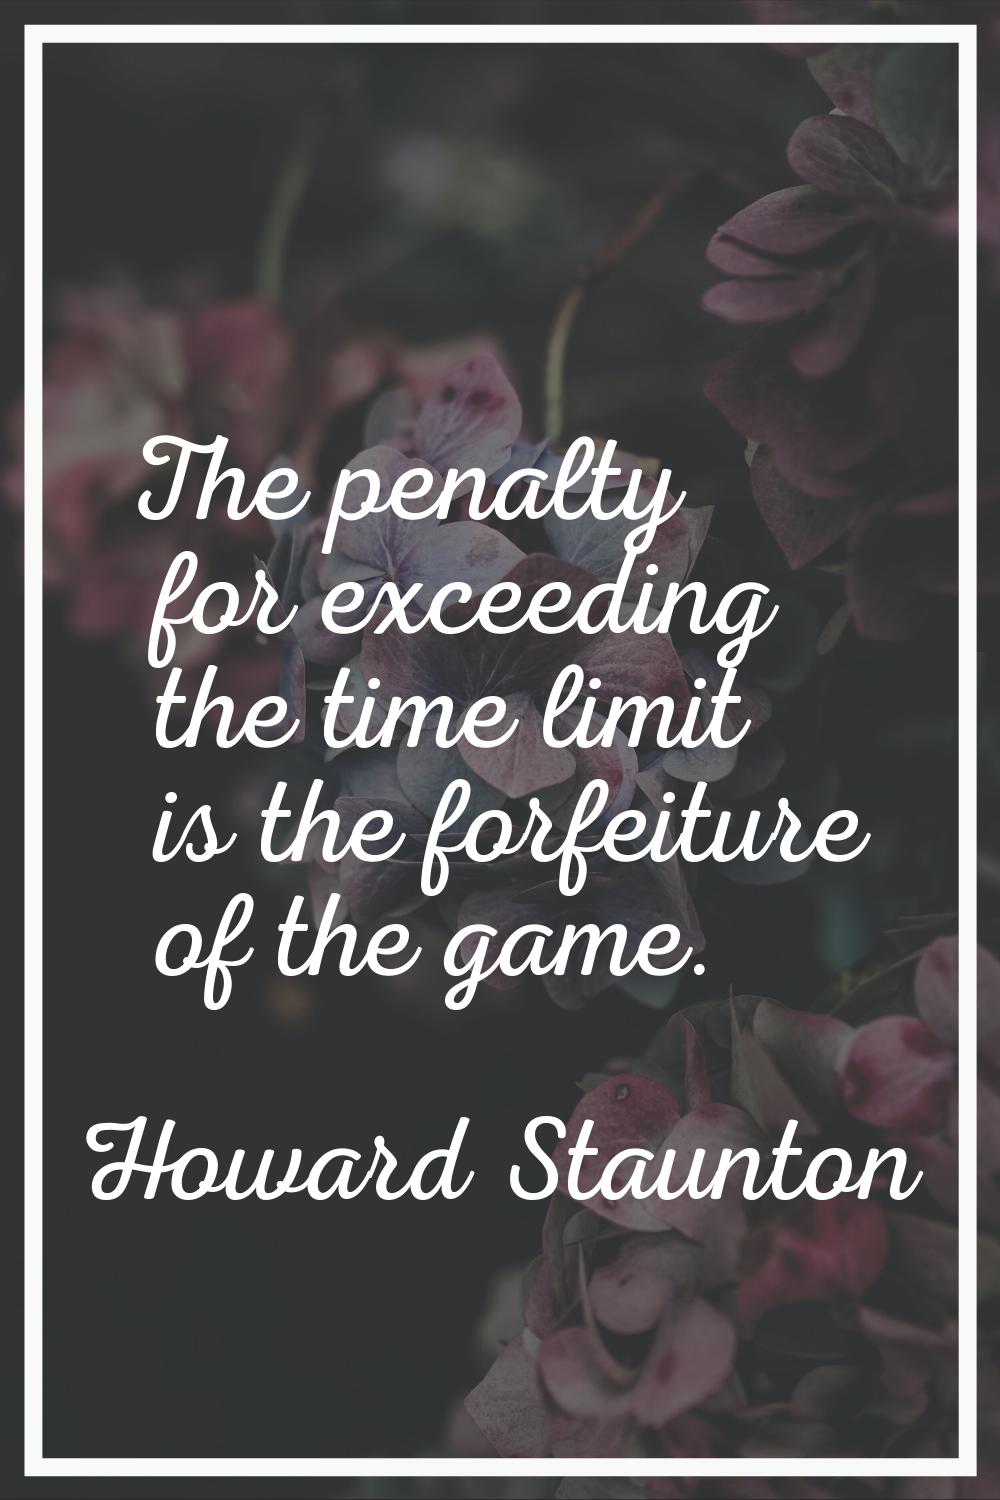 The penalty for exceeding the time limit is the forfeiture of the game.